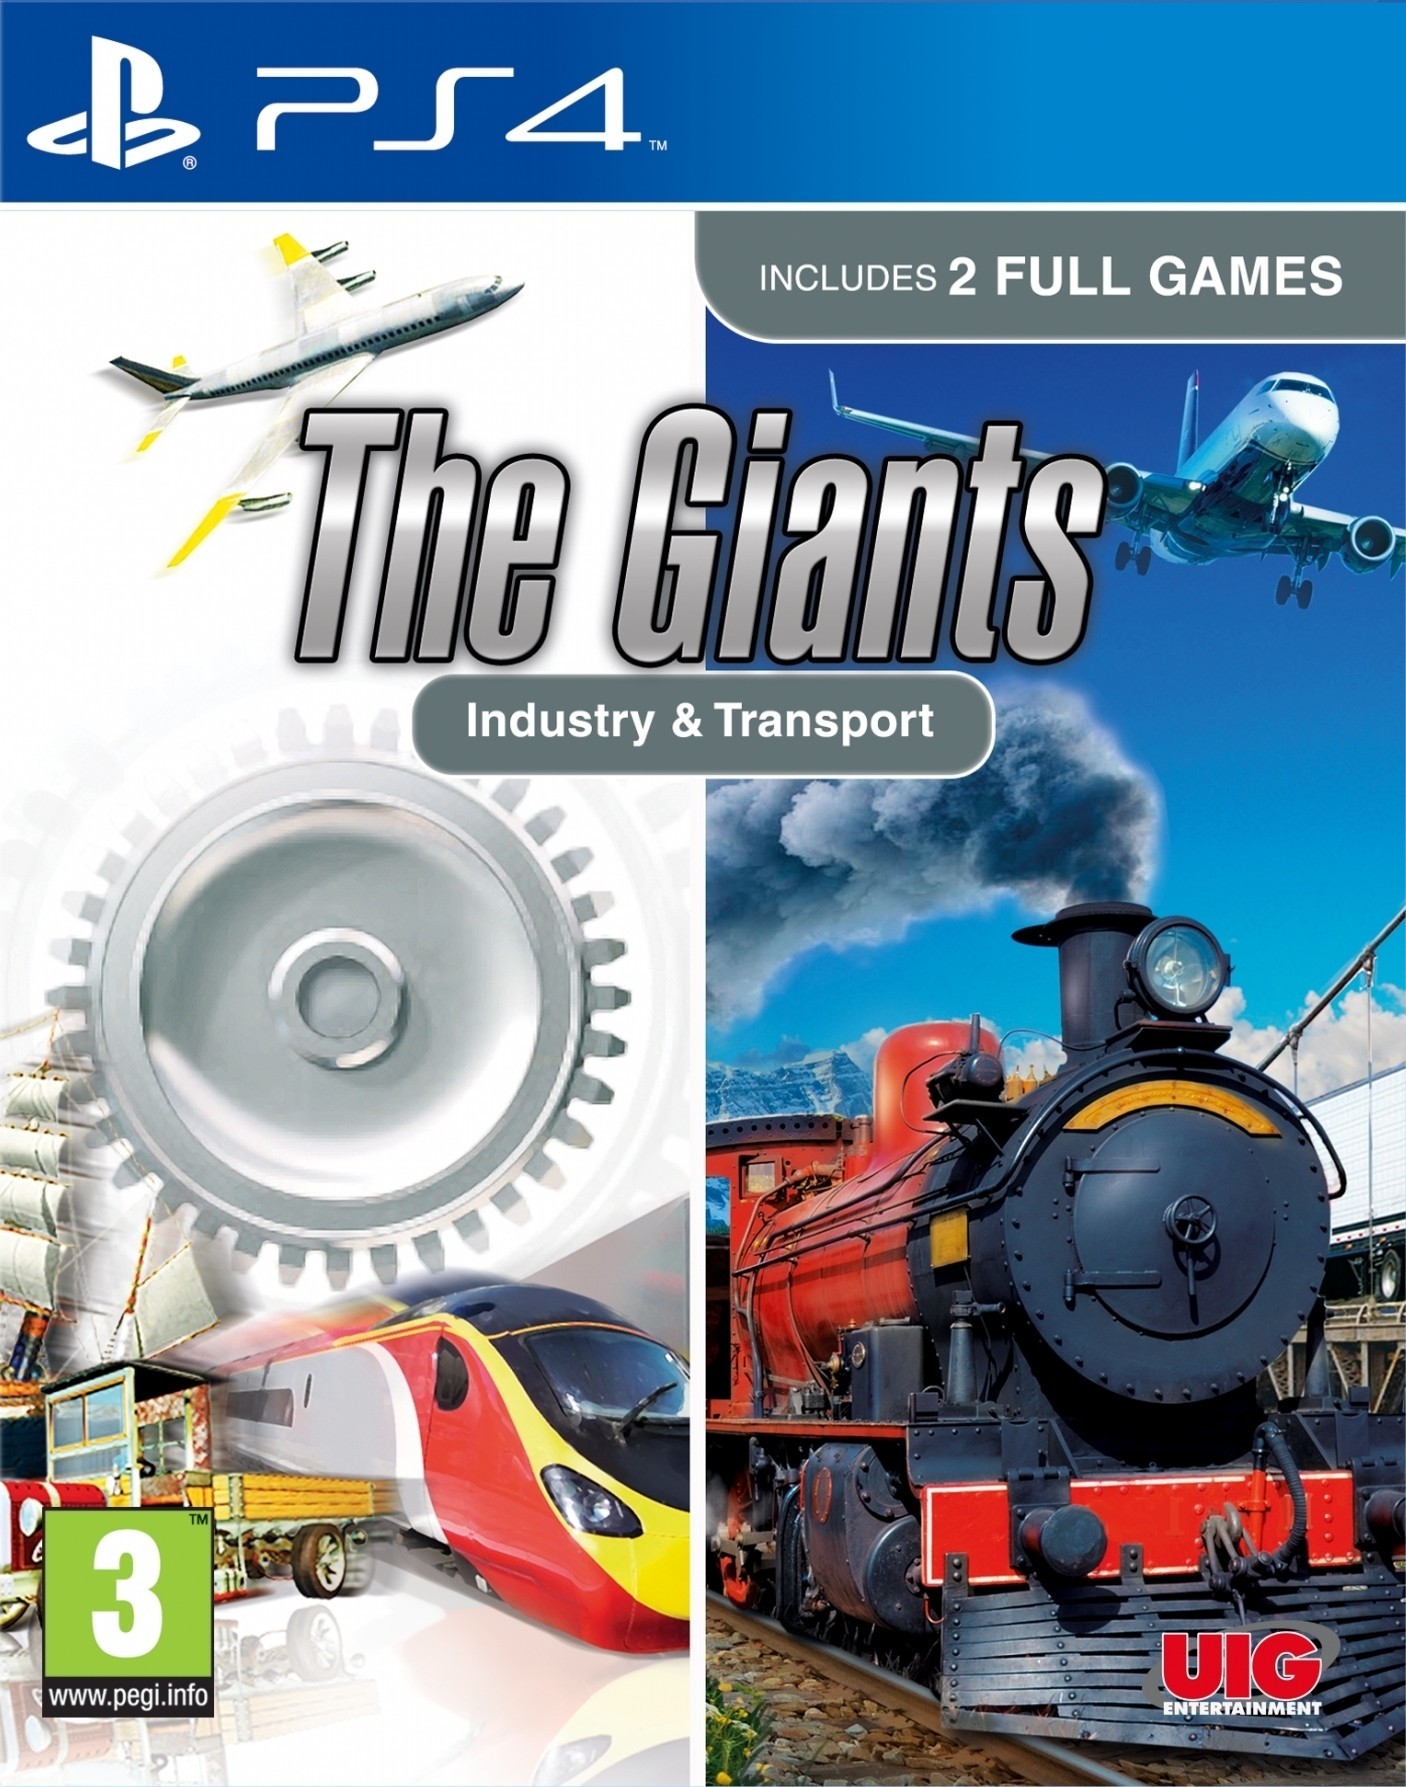 The Giants: Industry & Transport (PS4), UIG Entertainment